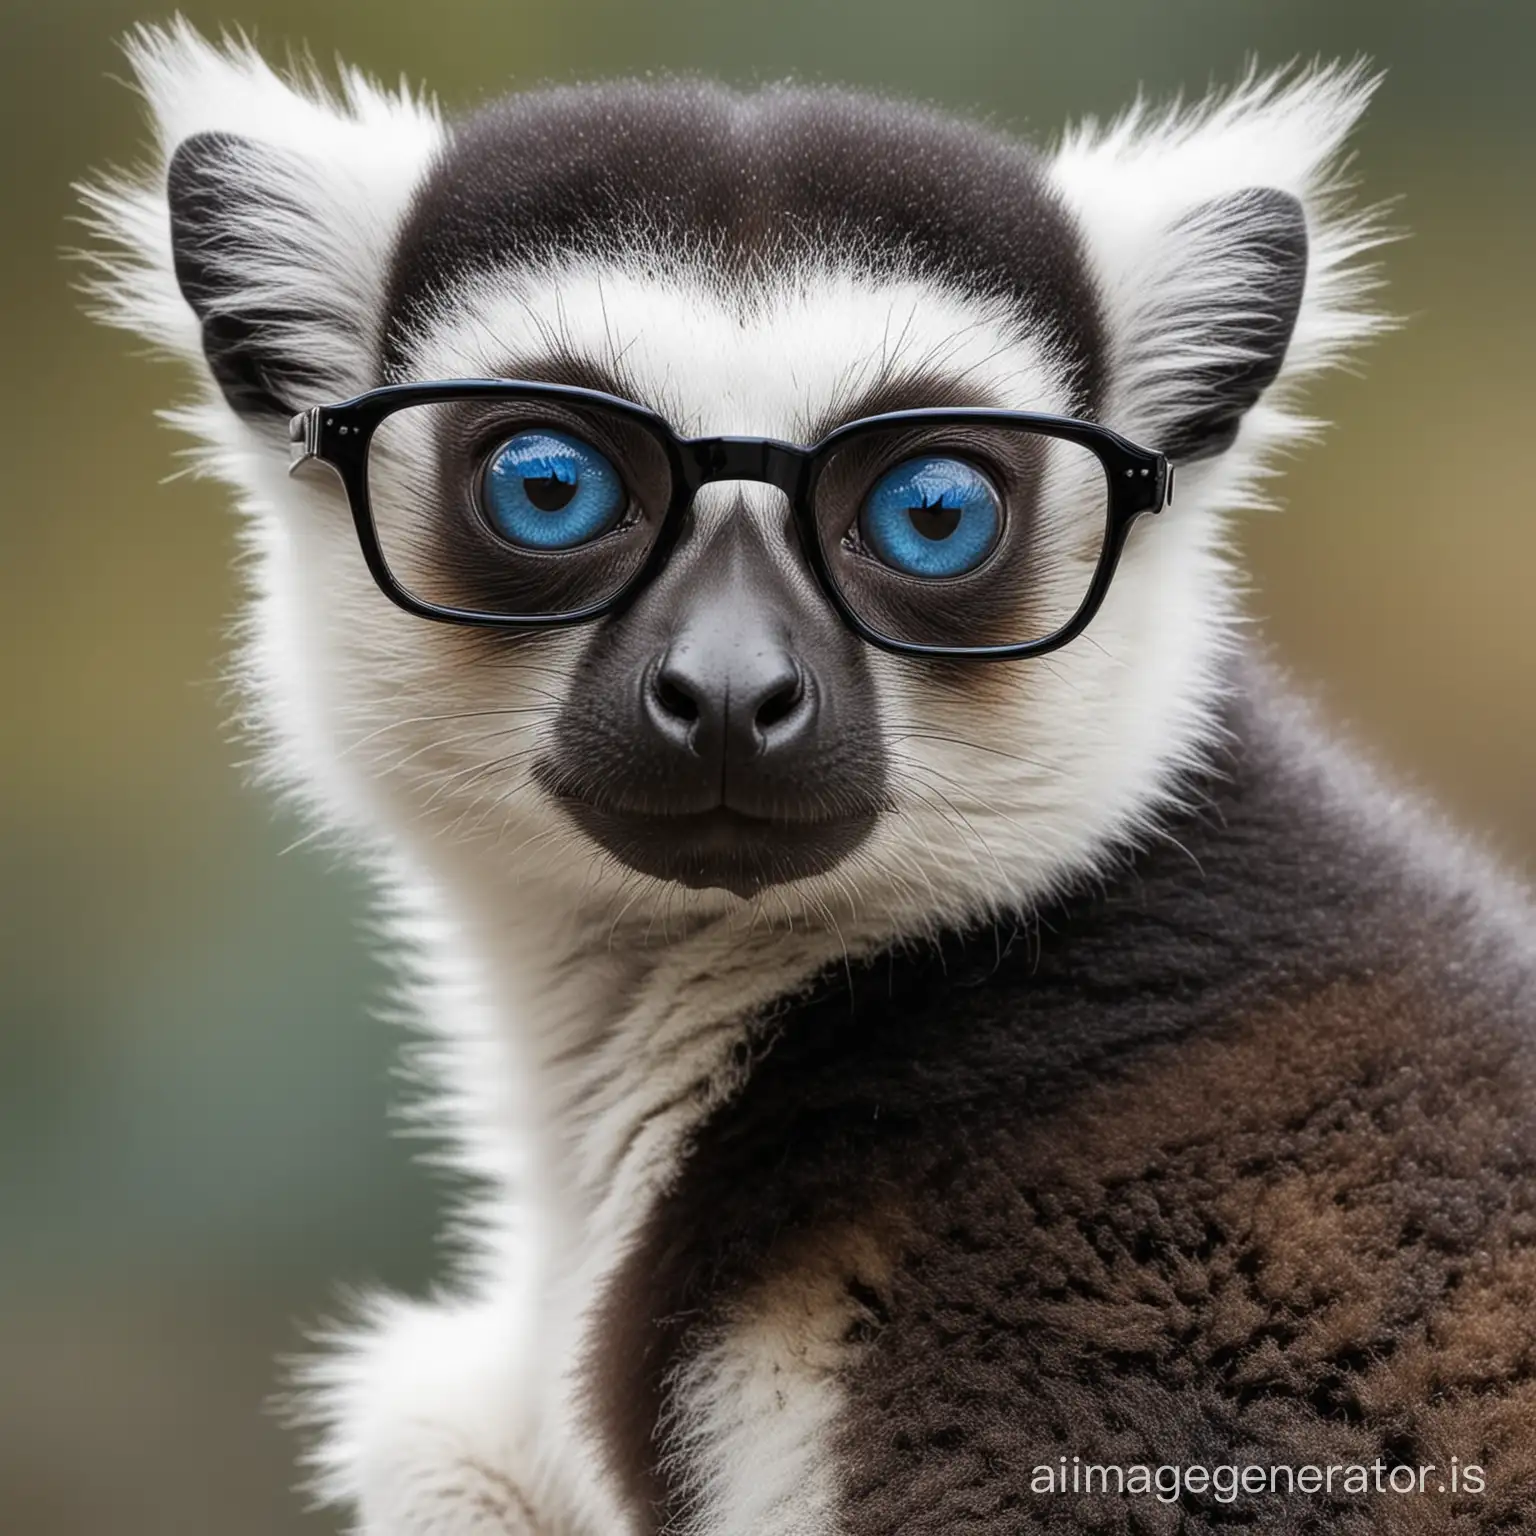 lemur with blue eyes and glasses